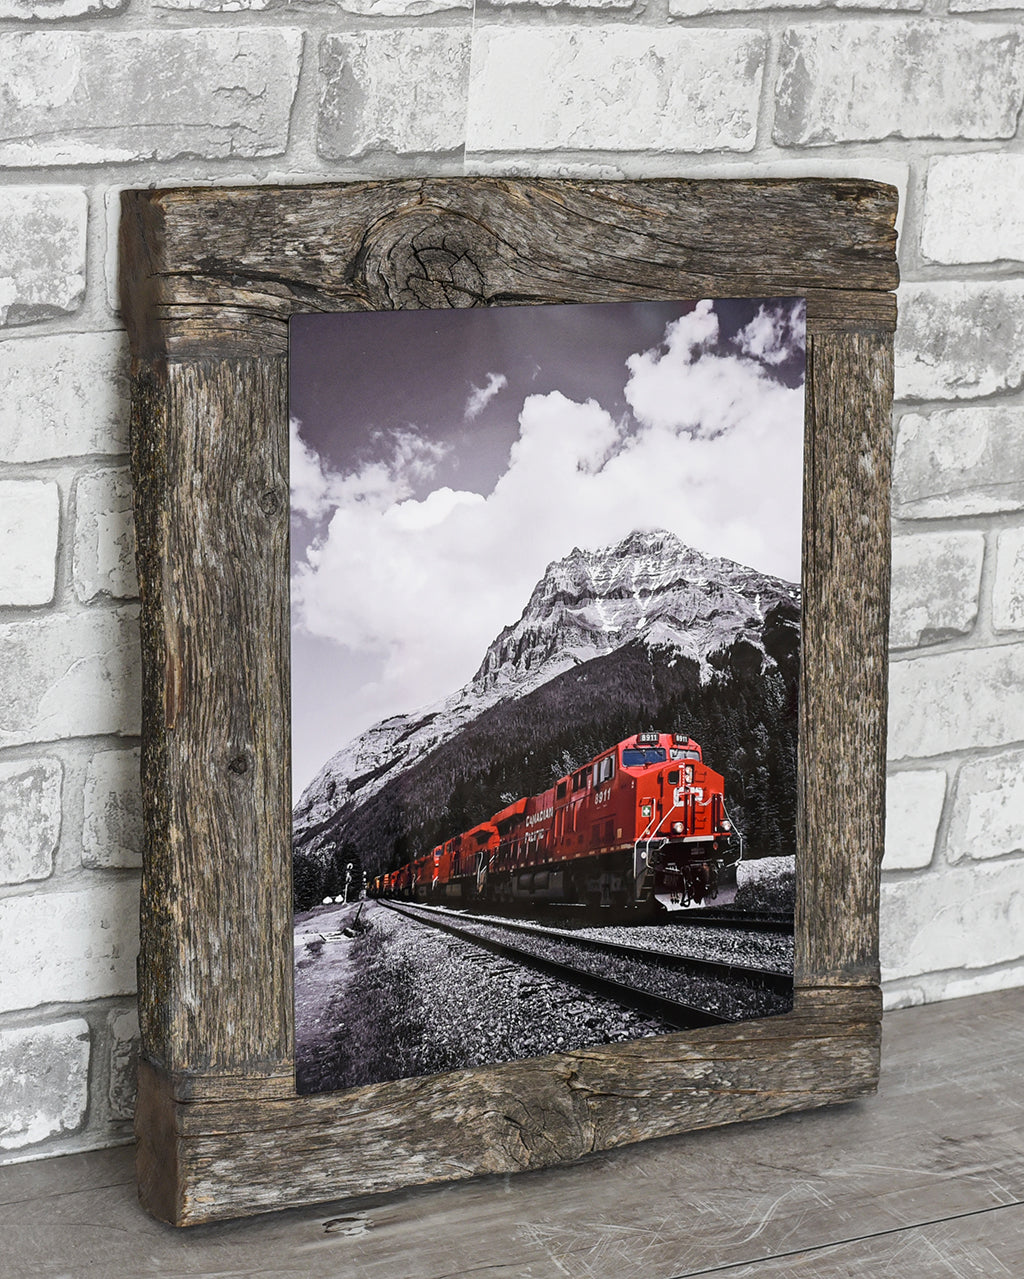 Barnwood Picture Frame  16x24 Reclaimed Wood Photo Frame